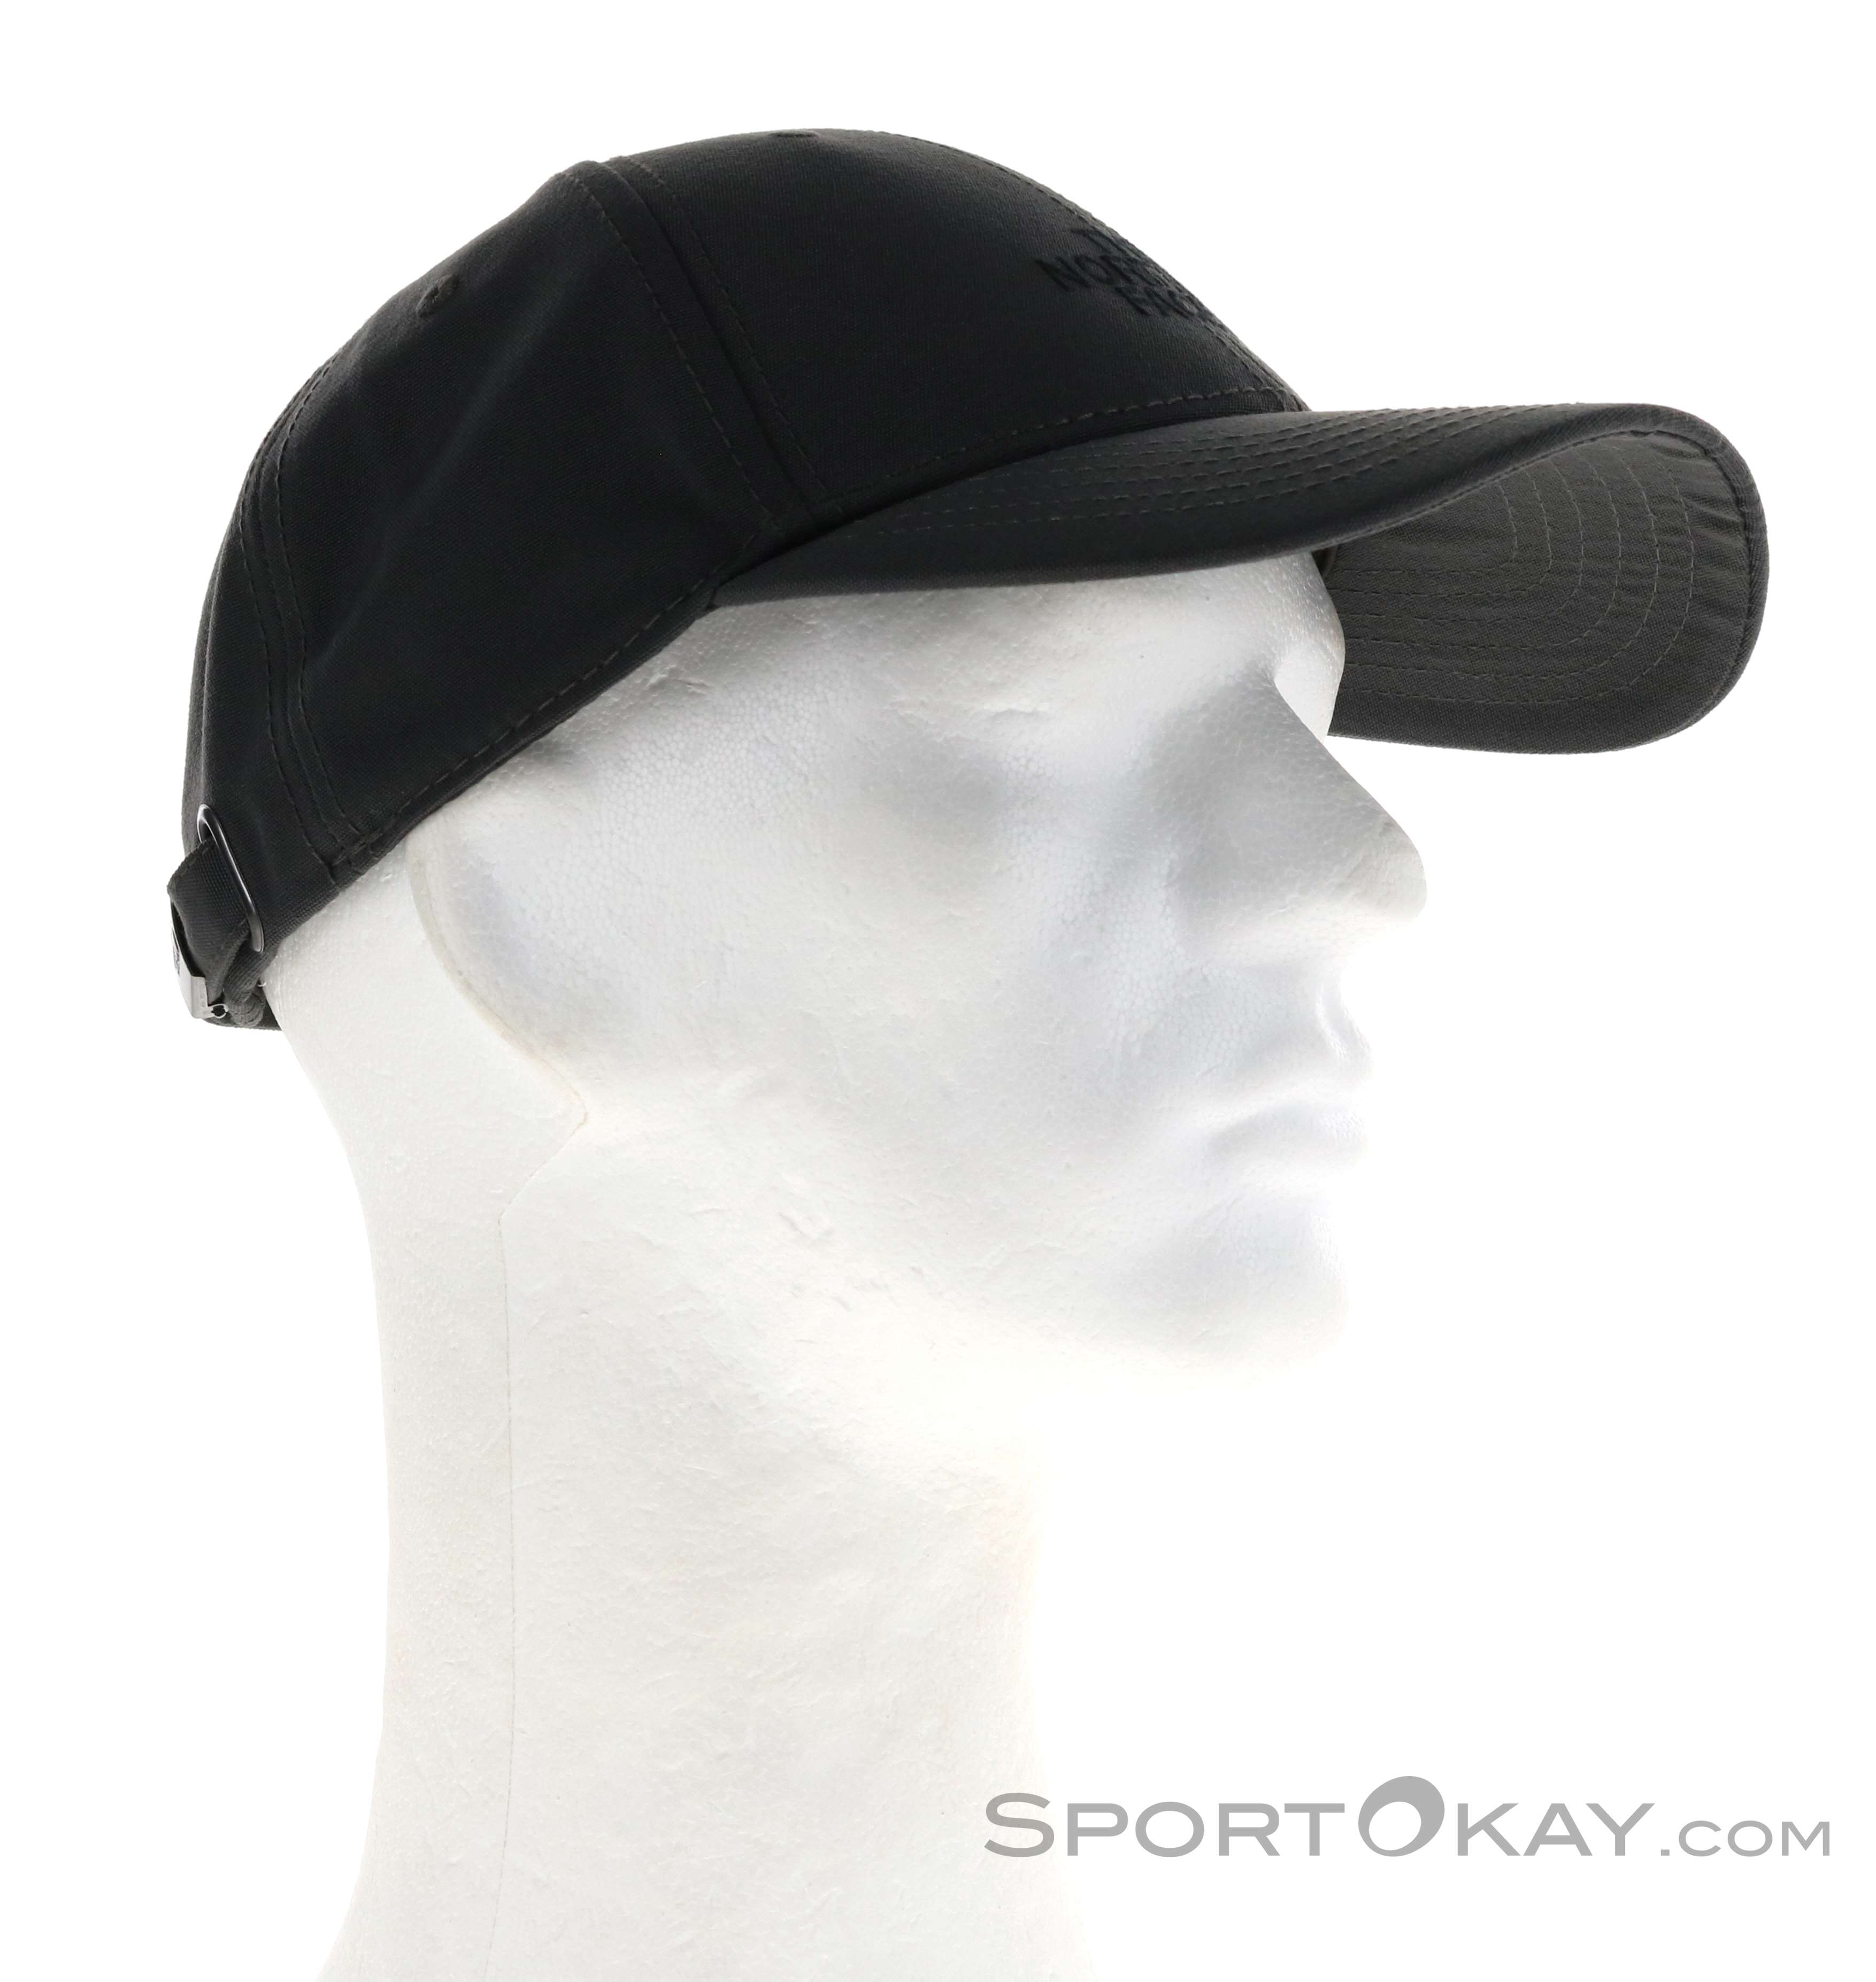 The North Face Recycled Baseball Fashion - Caps Leisure - All - Classic Clothing - 66 Cap